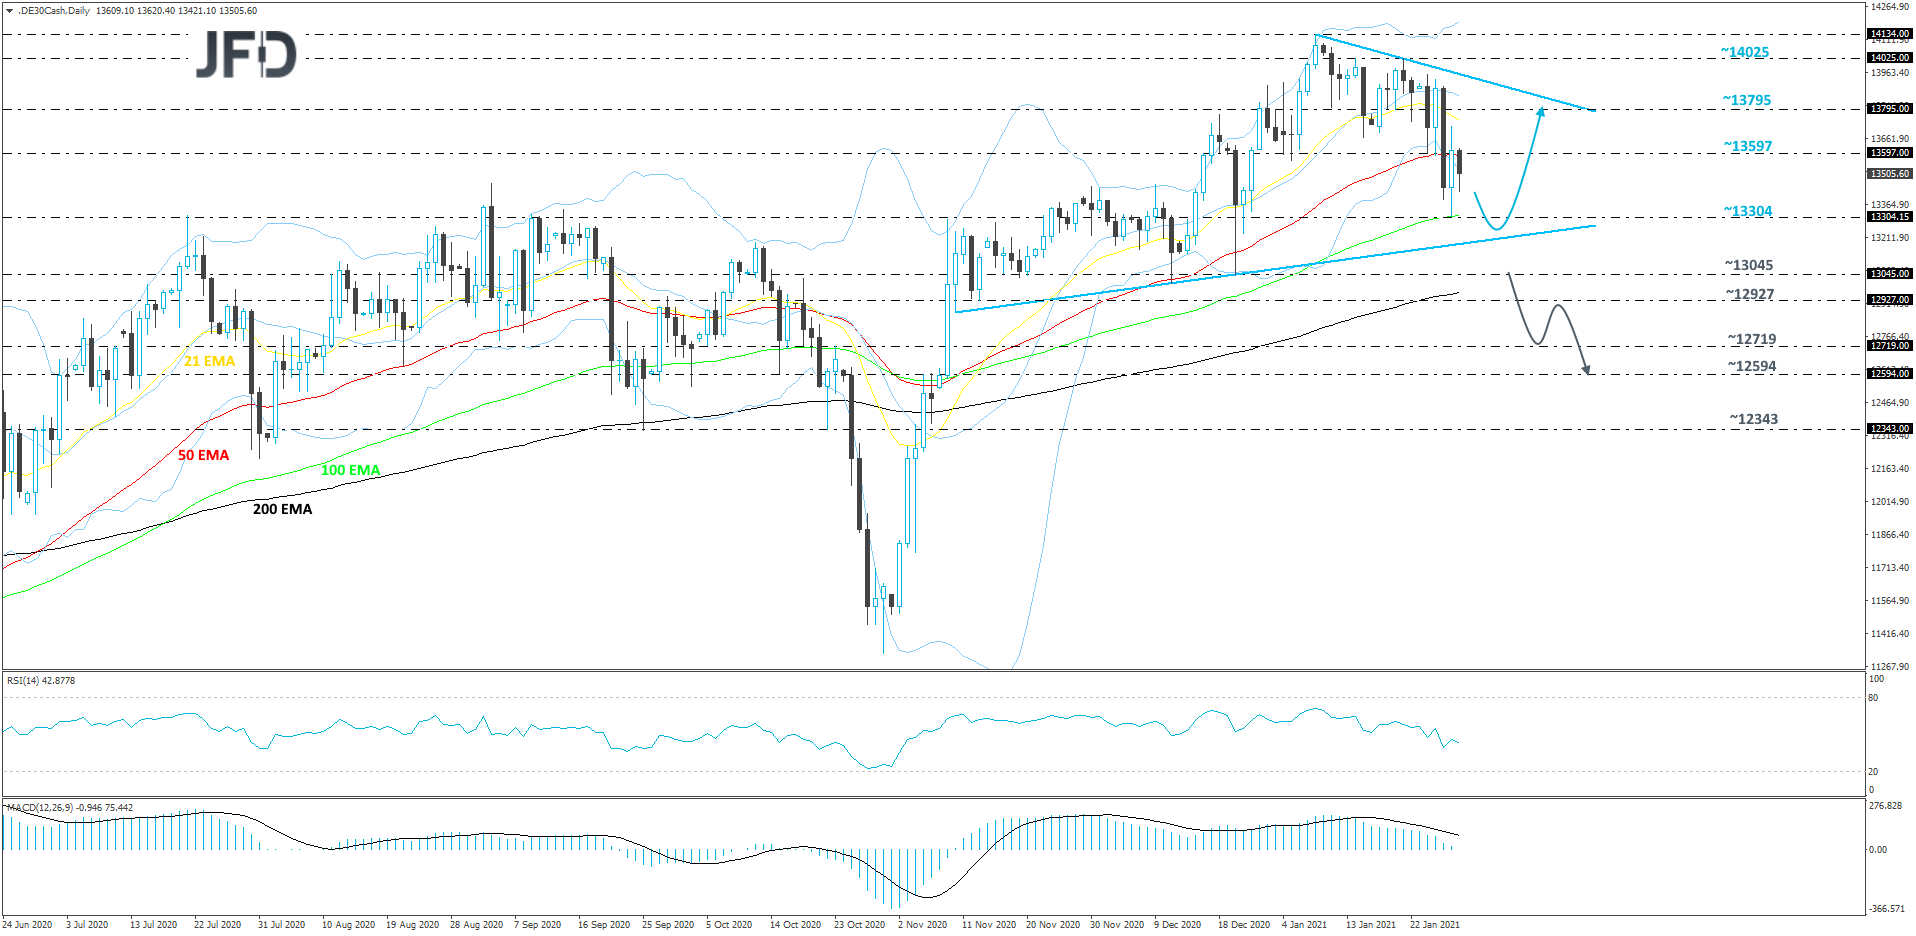 DAX daily chart technical analysis